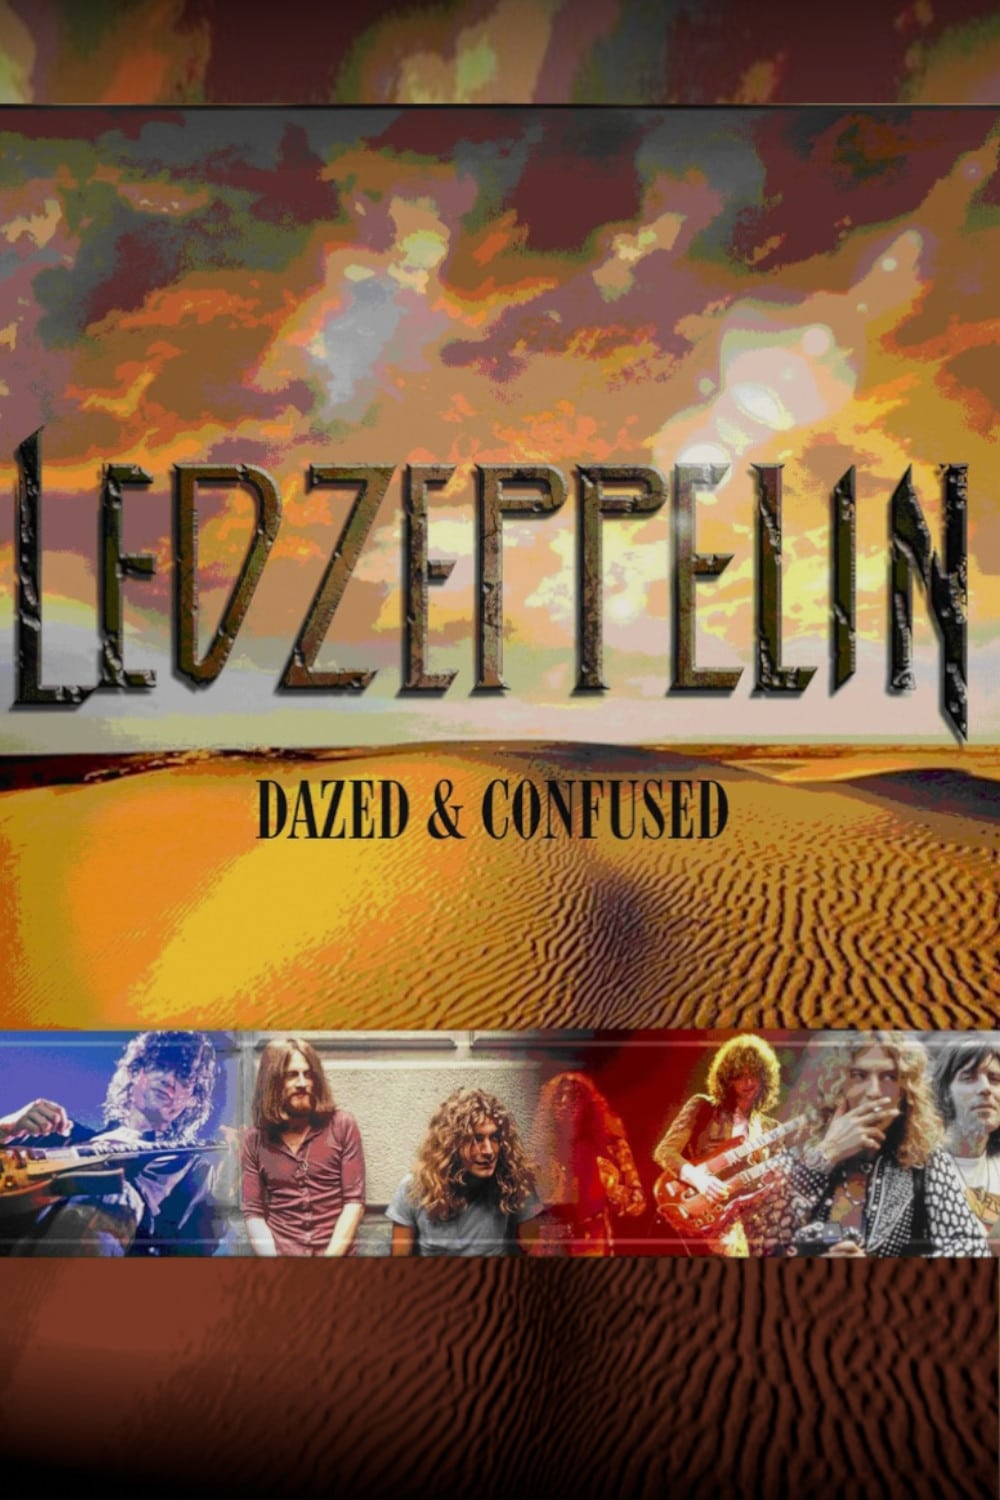 Led Zeppelin: Dazed & Confused on FREECABLE TV